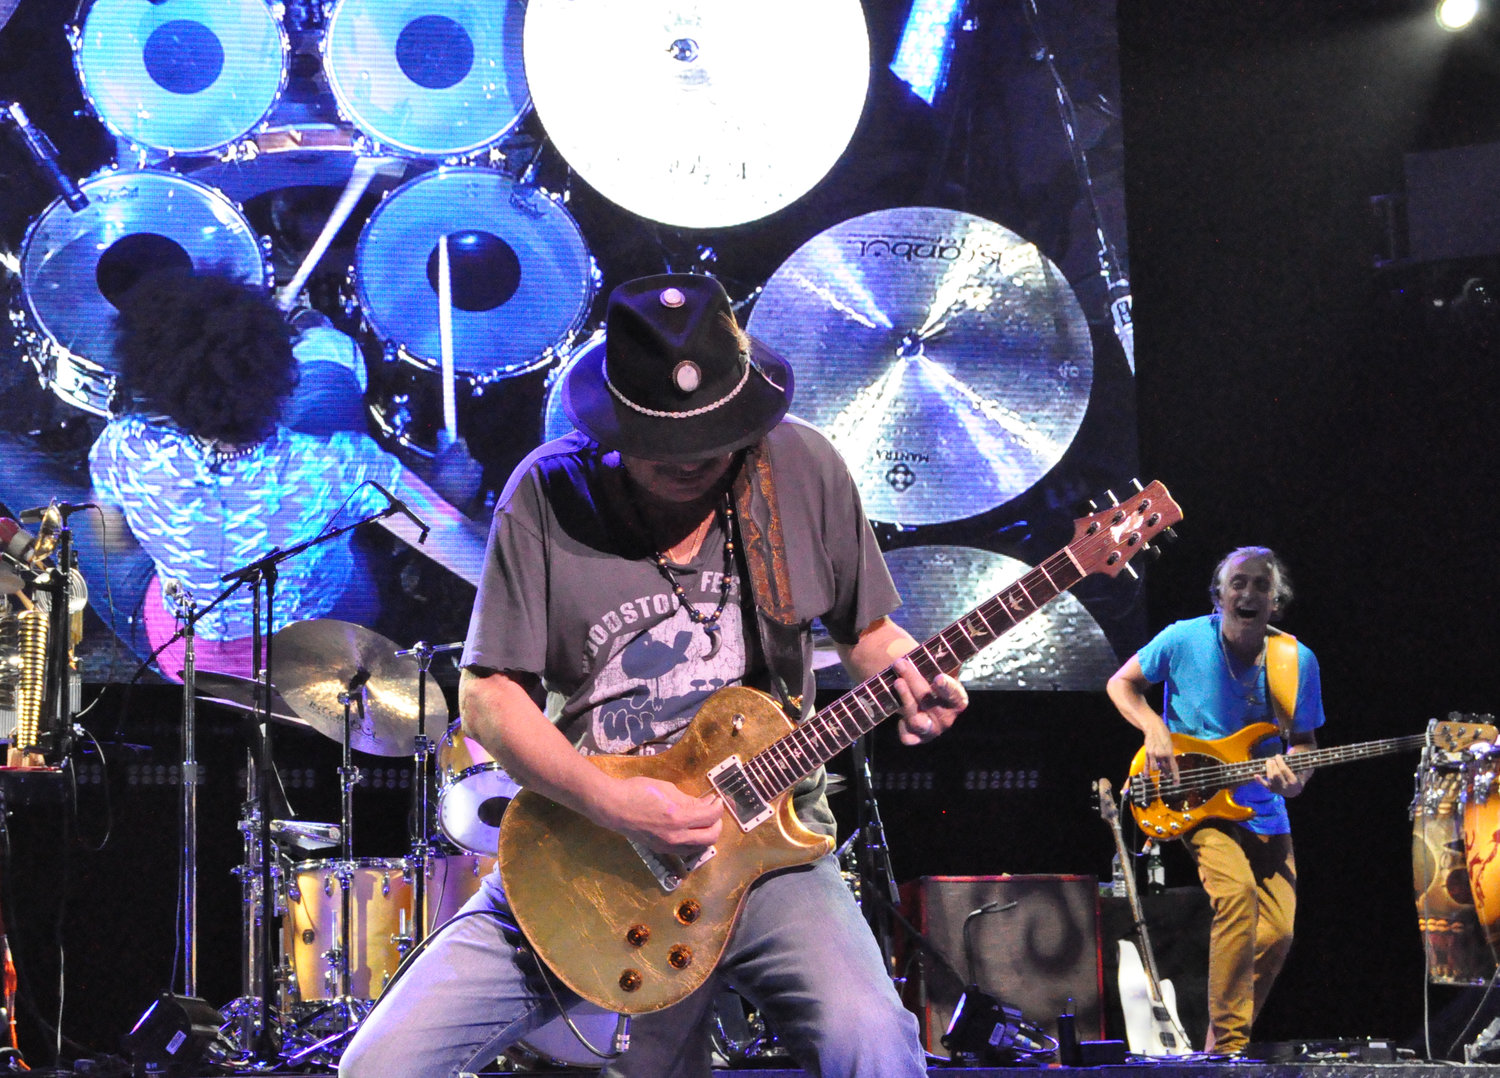 No year-in-review is complete without a tip o’ the hat to Bethel Woods Center for the Arts and its always-amazing lineup of headliners, gracing the stage to present concerts under the stars. The 2019 tribute to the Woodstock Music Festival included Santana with Carlos himself front and center as thousands roared in approval.